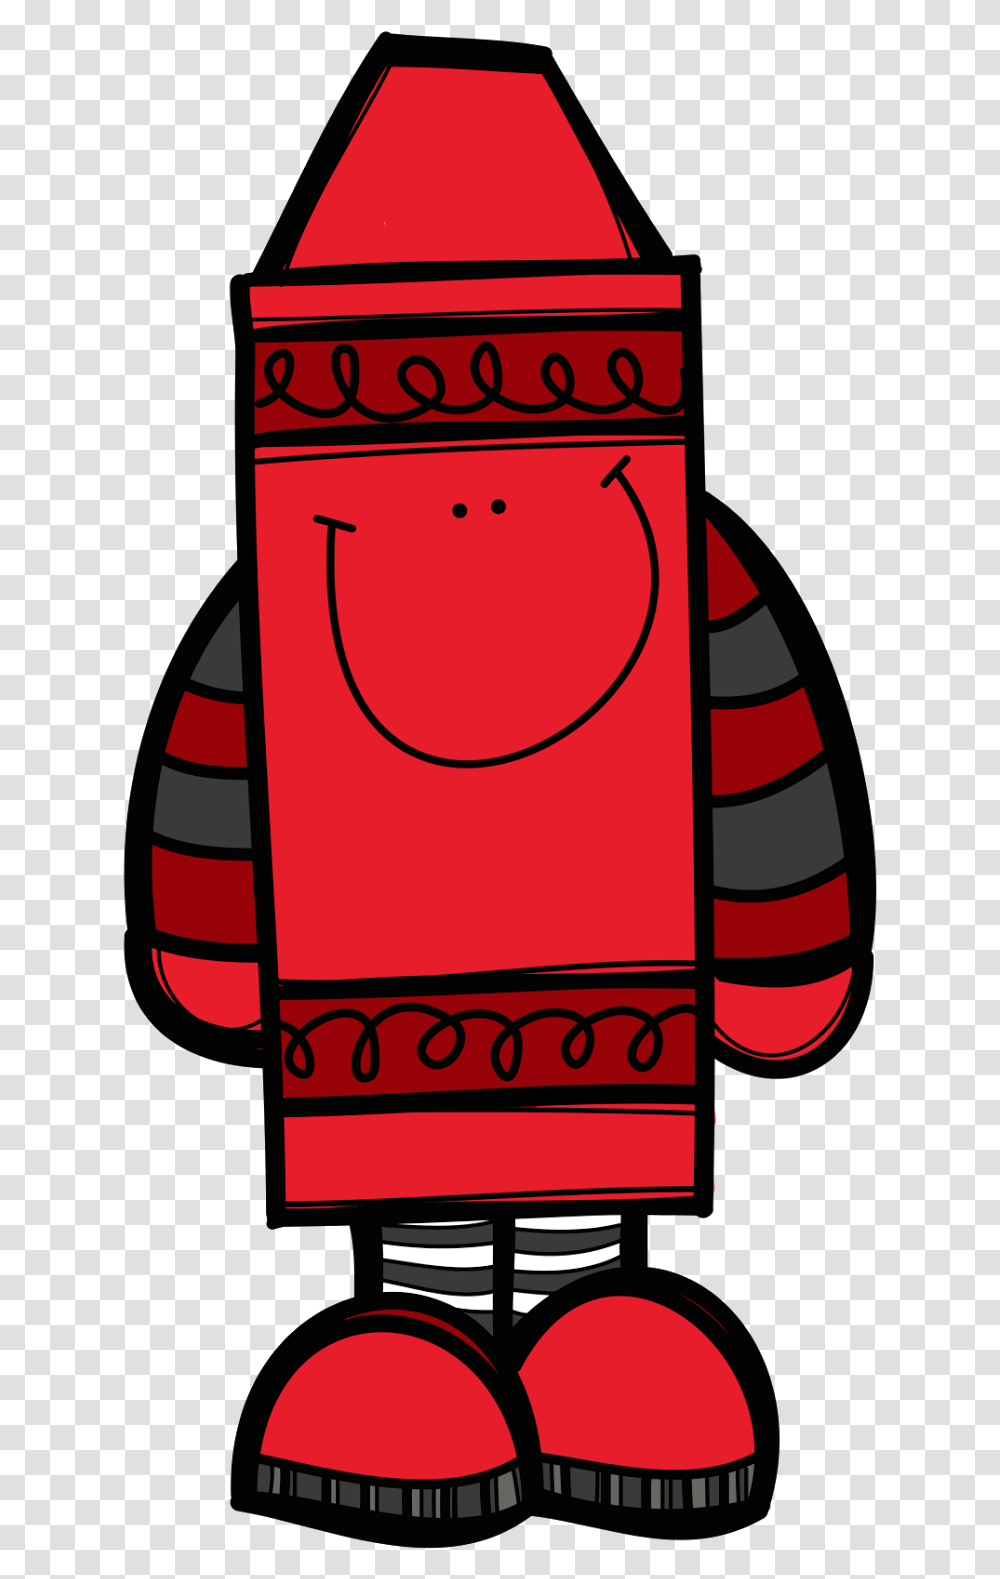 So The New Story Goes I Was Named After A Crayon Red Crayon Clip Art, Apparel, Mailbox, Letterbox Transparent Png